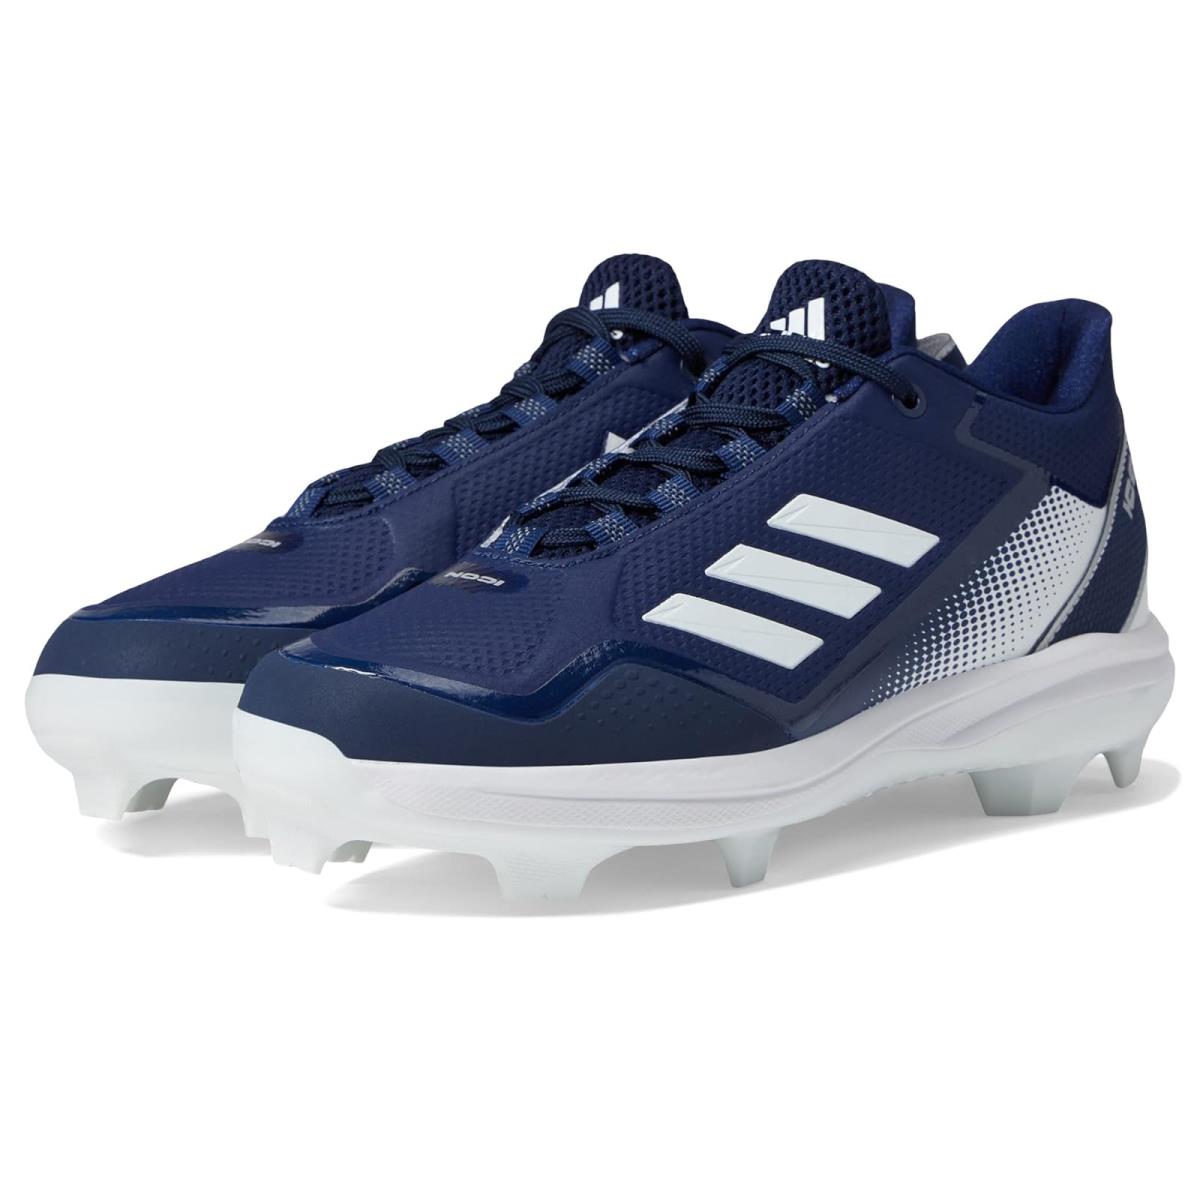 Man`s Sneakers Athletic Shoes Adidas Icon 7 Tpu Baseball Cleats Team Navy Blue/Silver Metallic/White